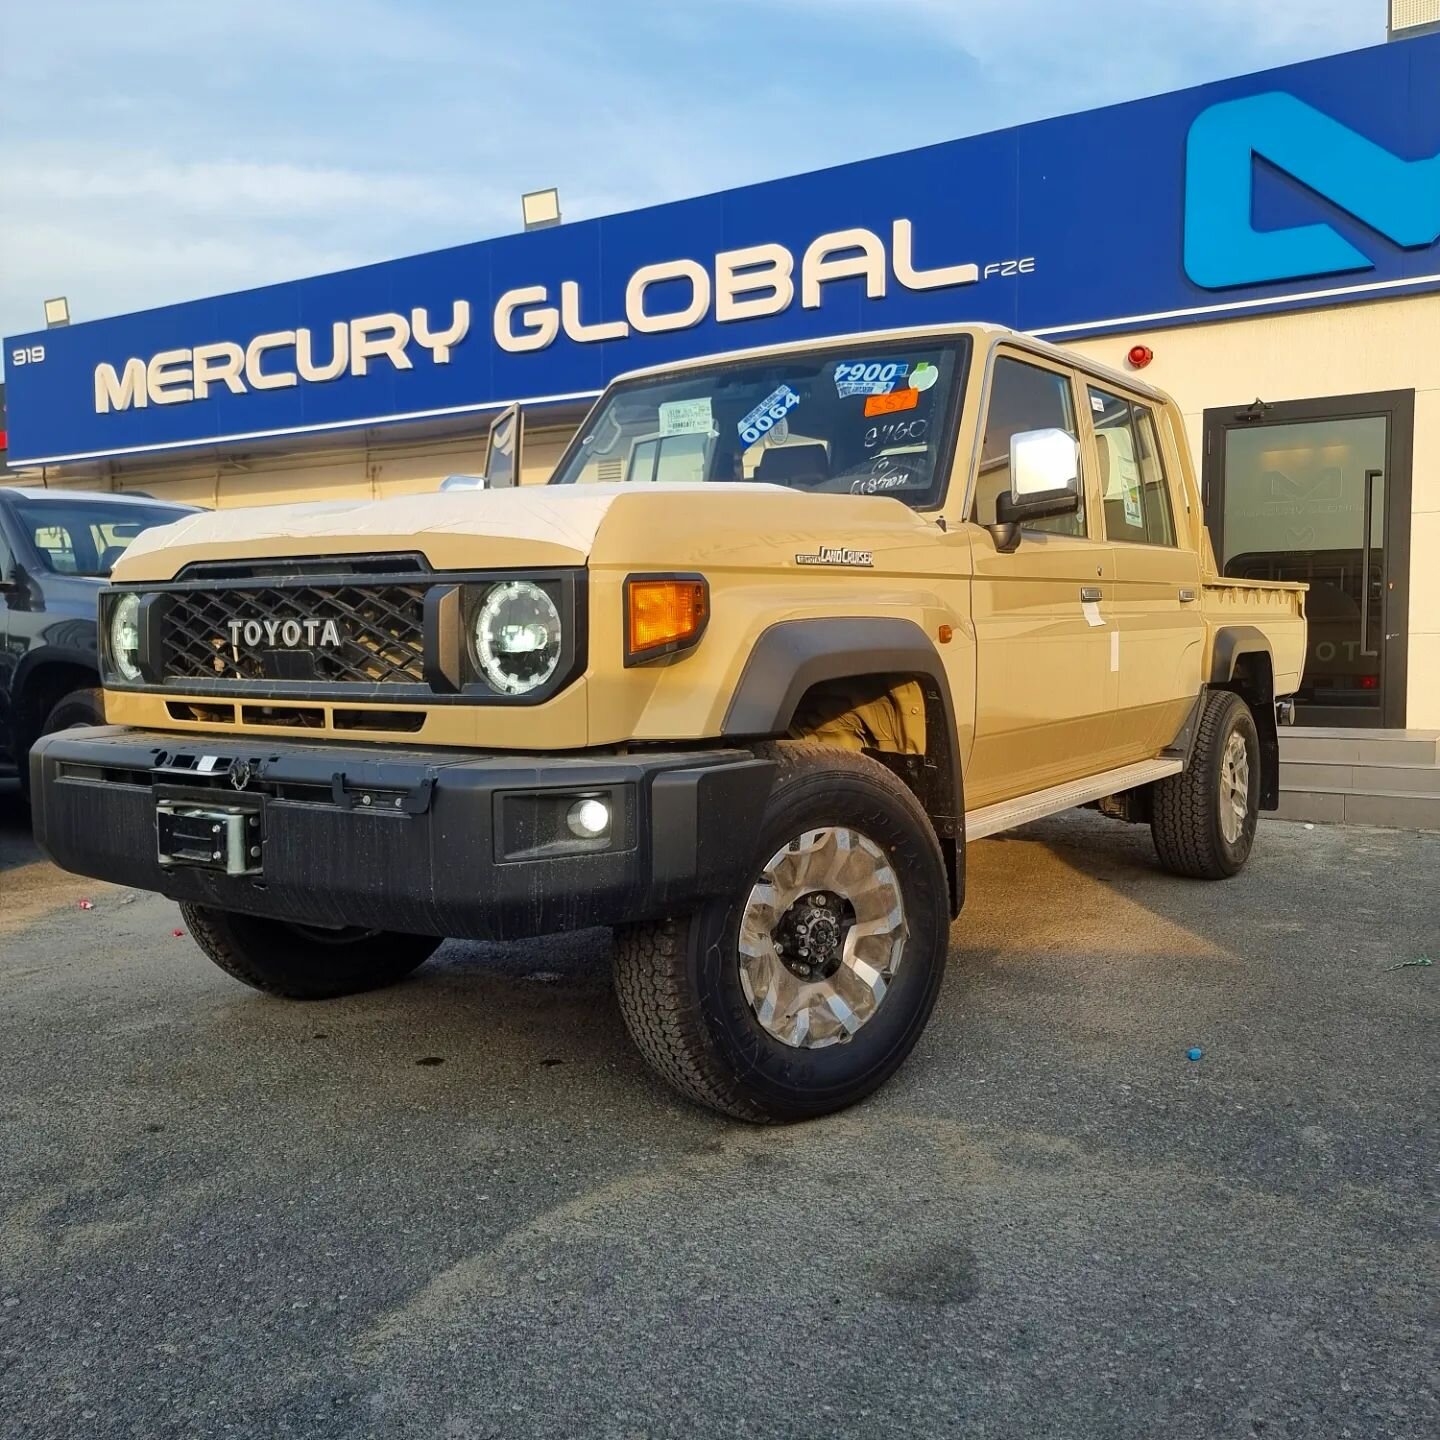 2024 Land Cruiser pickup 2.8ltr diesel Automatic transmission double cabin Full option.
.
Options
- Turbo diesel engine 
- Differential Lock 
- 16 inch Alloy wheels
- Electric front winch
- LED head Lights
- front screen with reverse camera
- power w